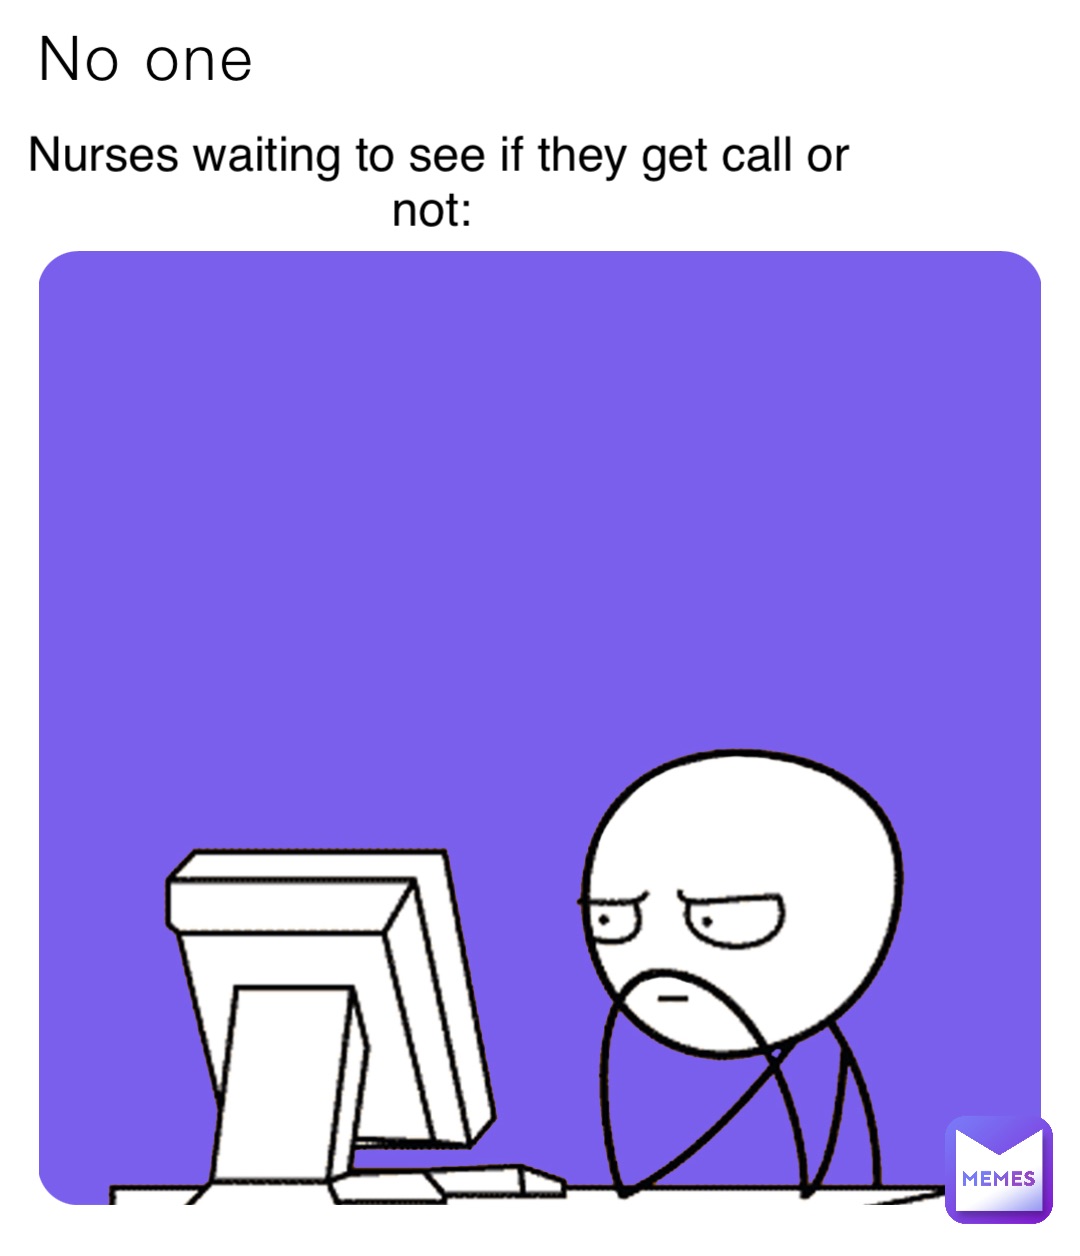 No one Nurses waiting to see if they get call or not: